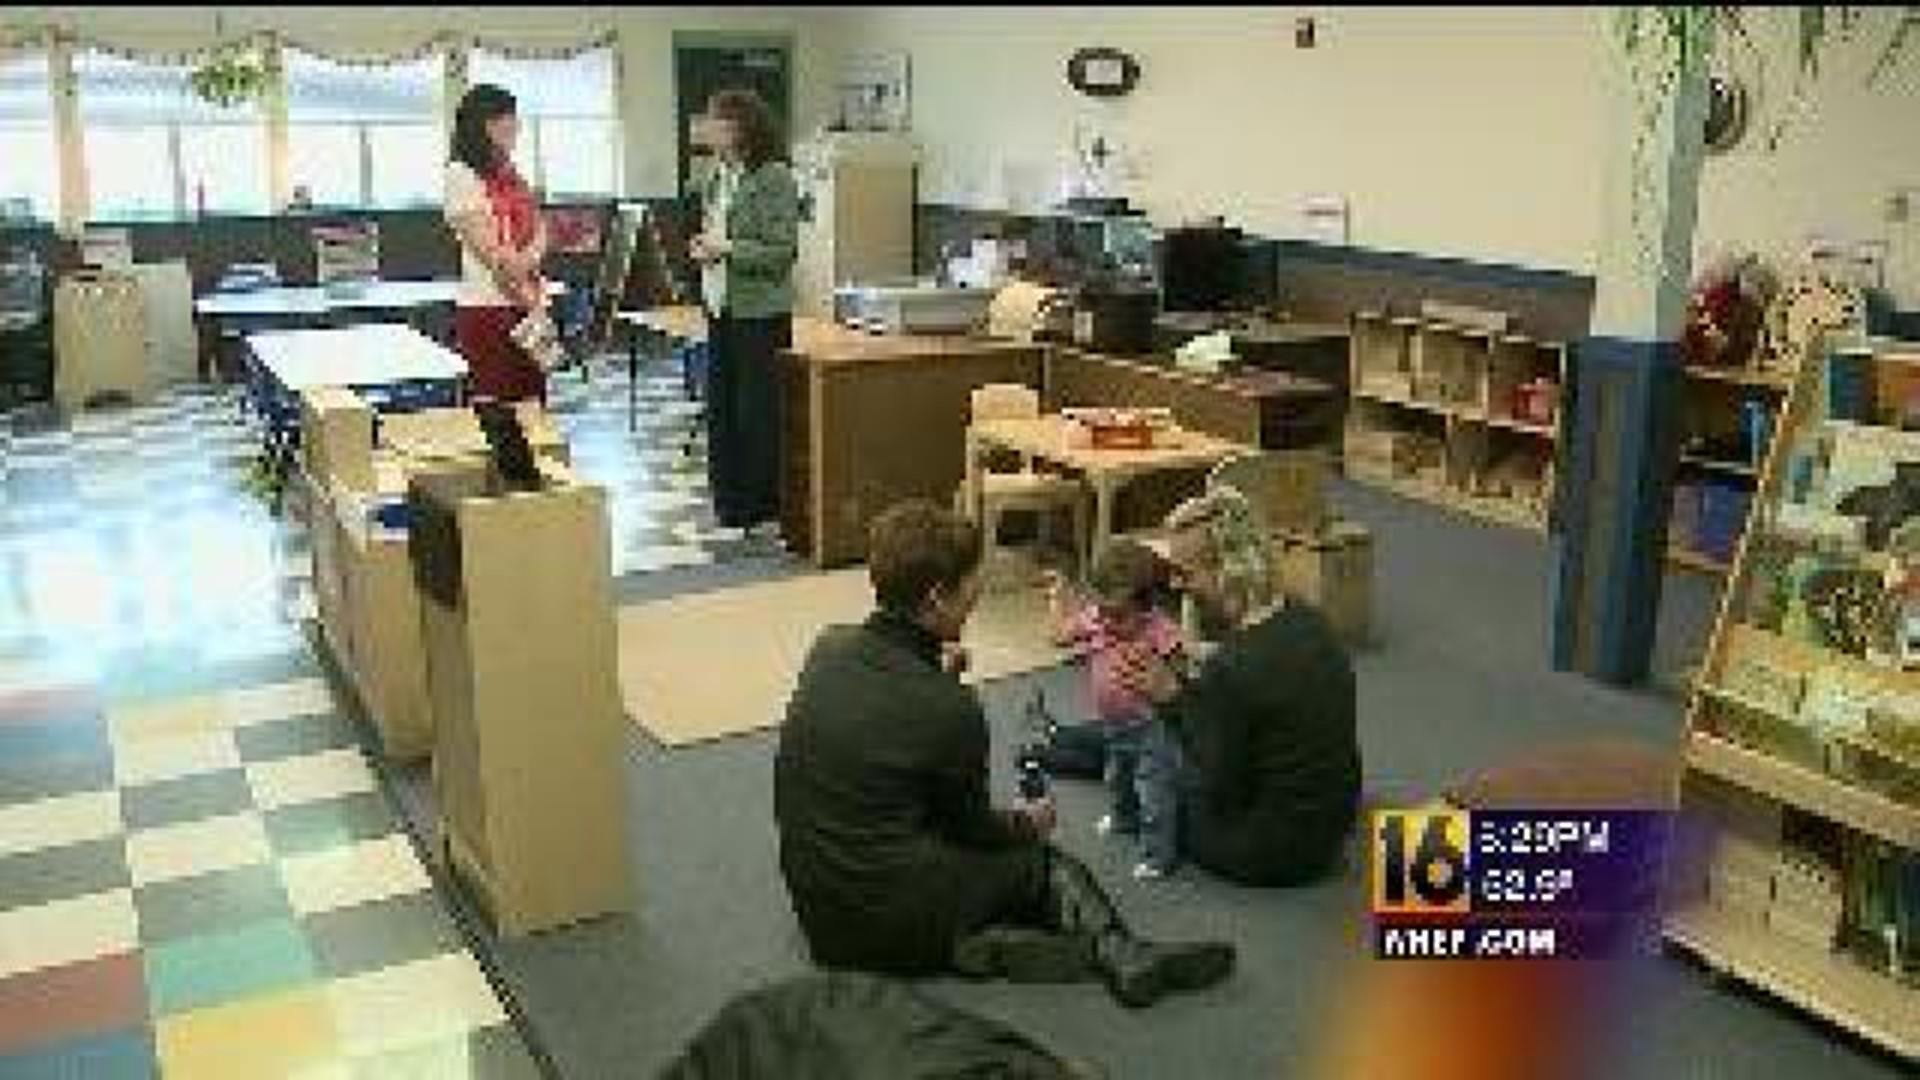 Day Care Center to Close